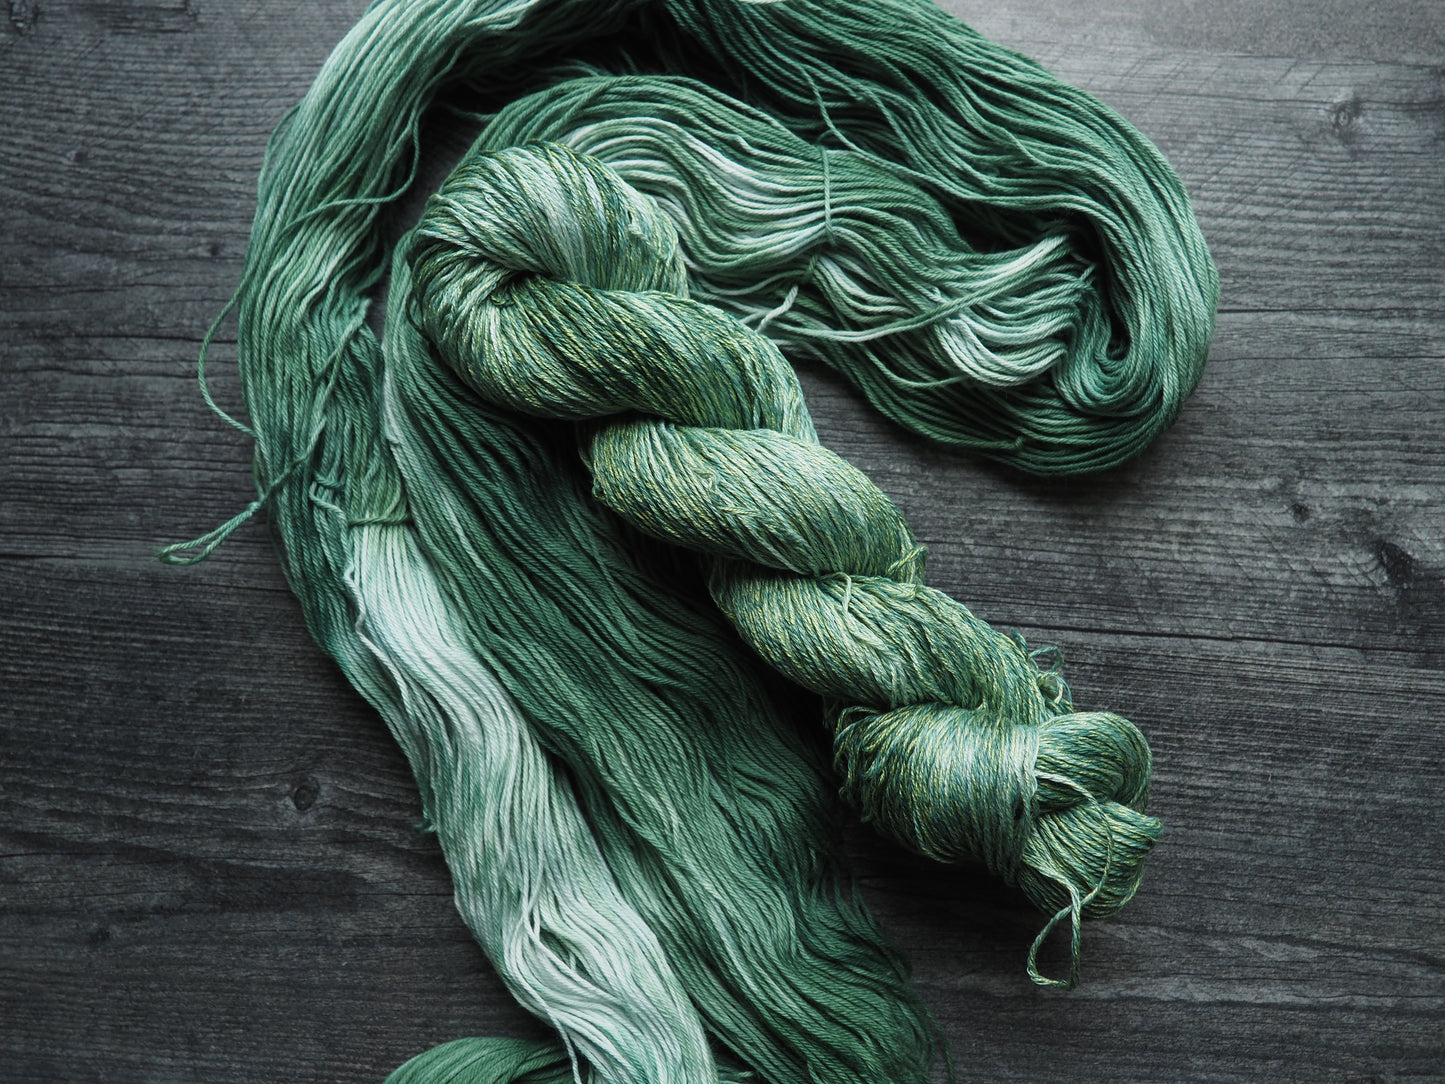 Beyond the Mist - Dyed to Order *Please allow 8 weeks for dyeing*